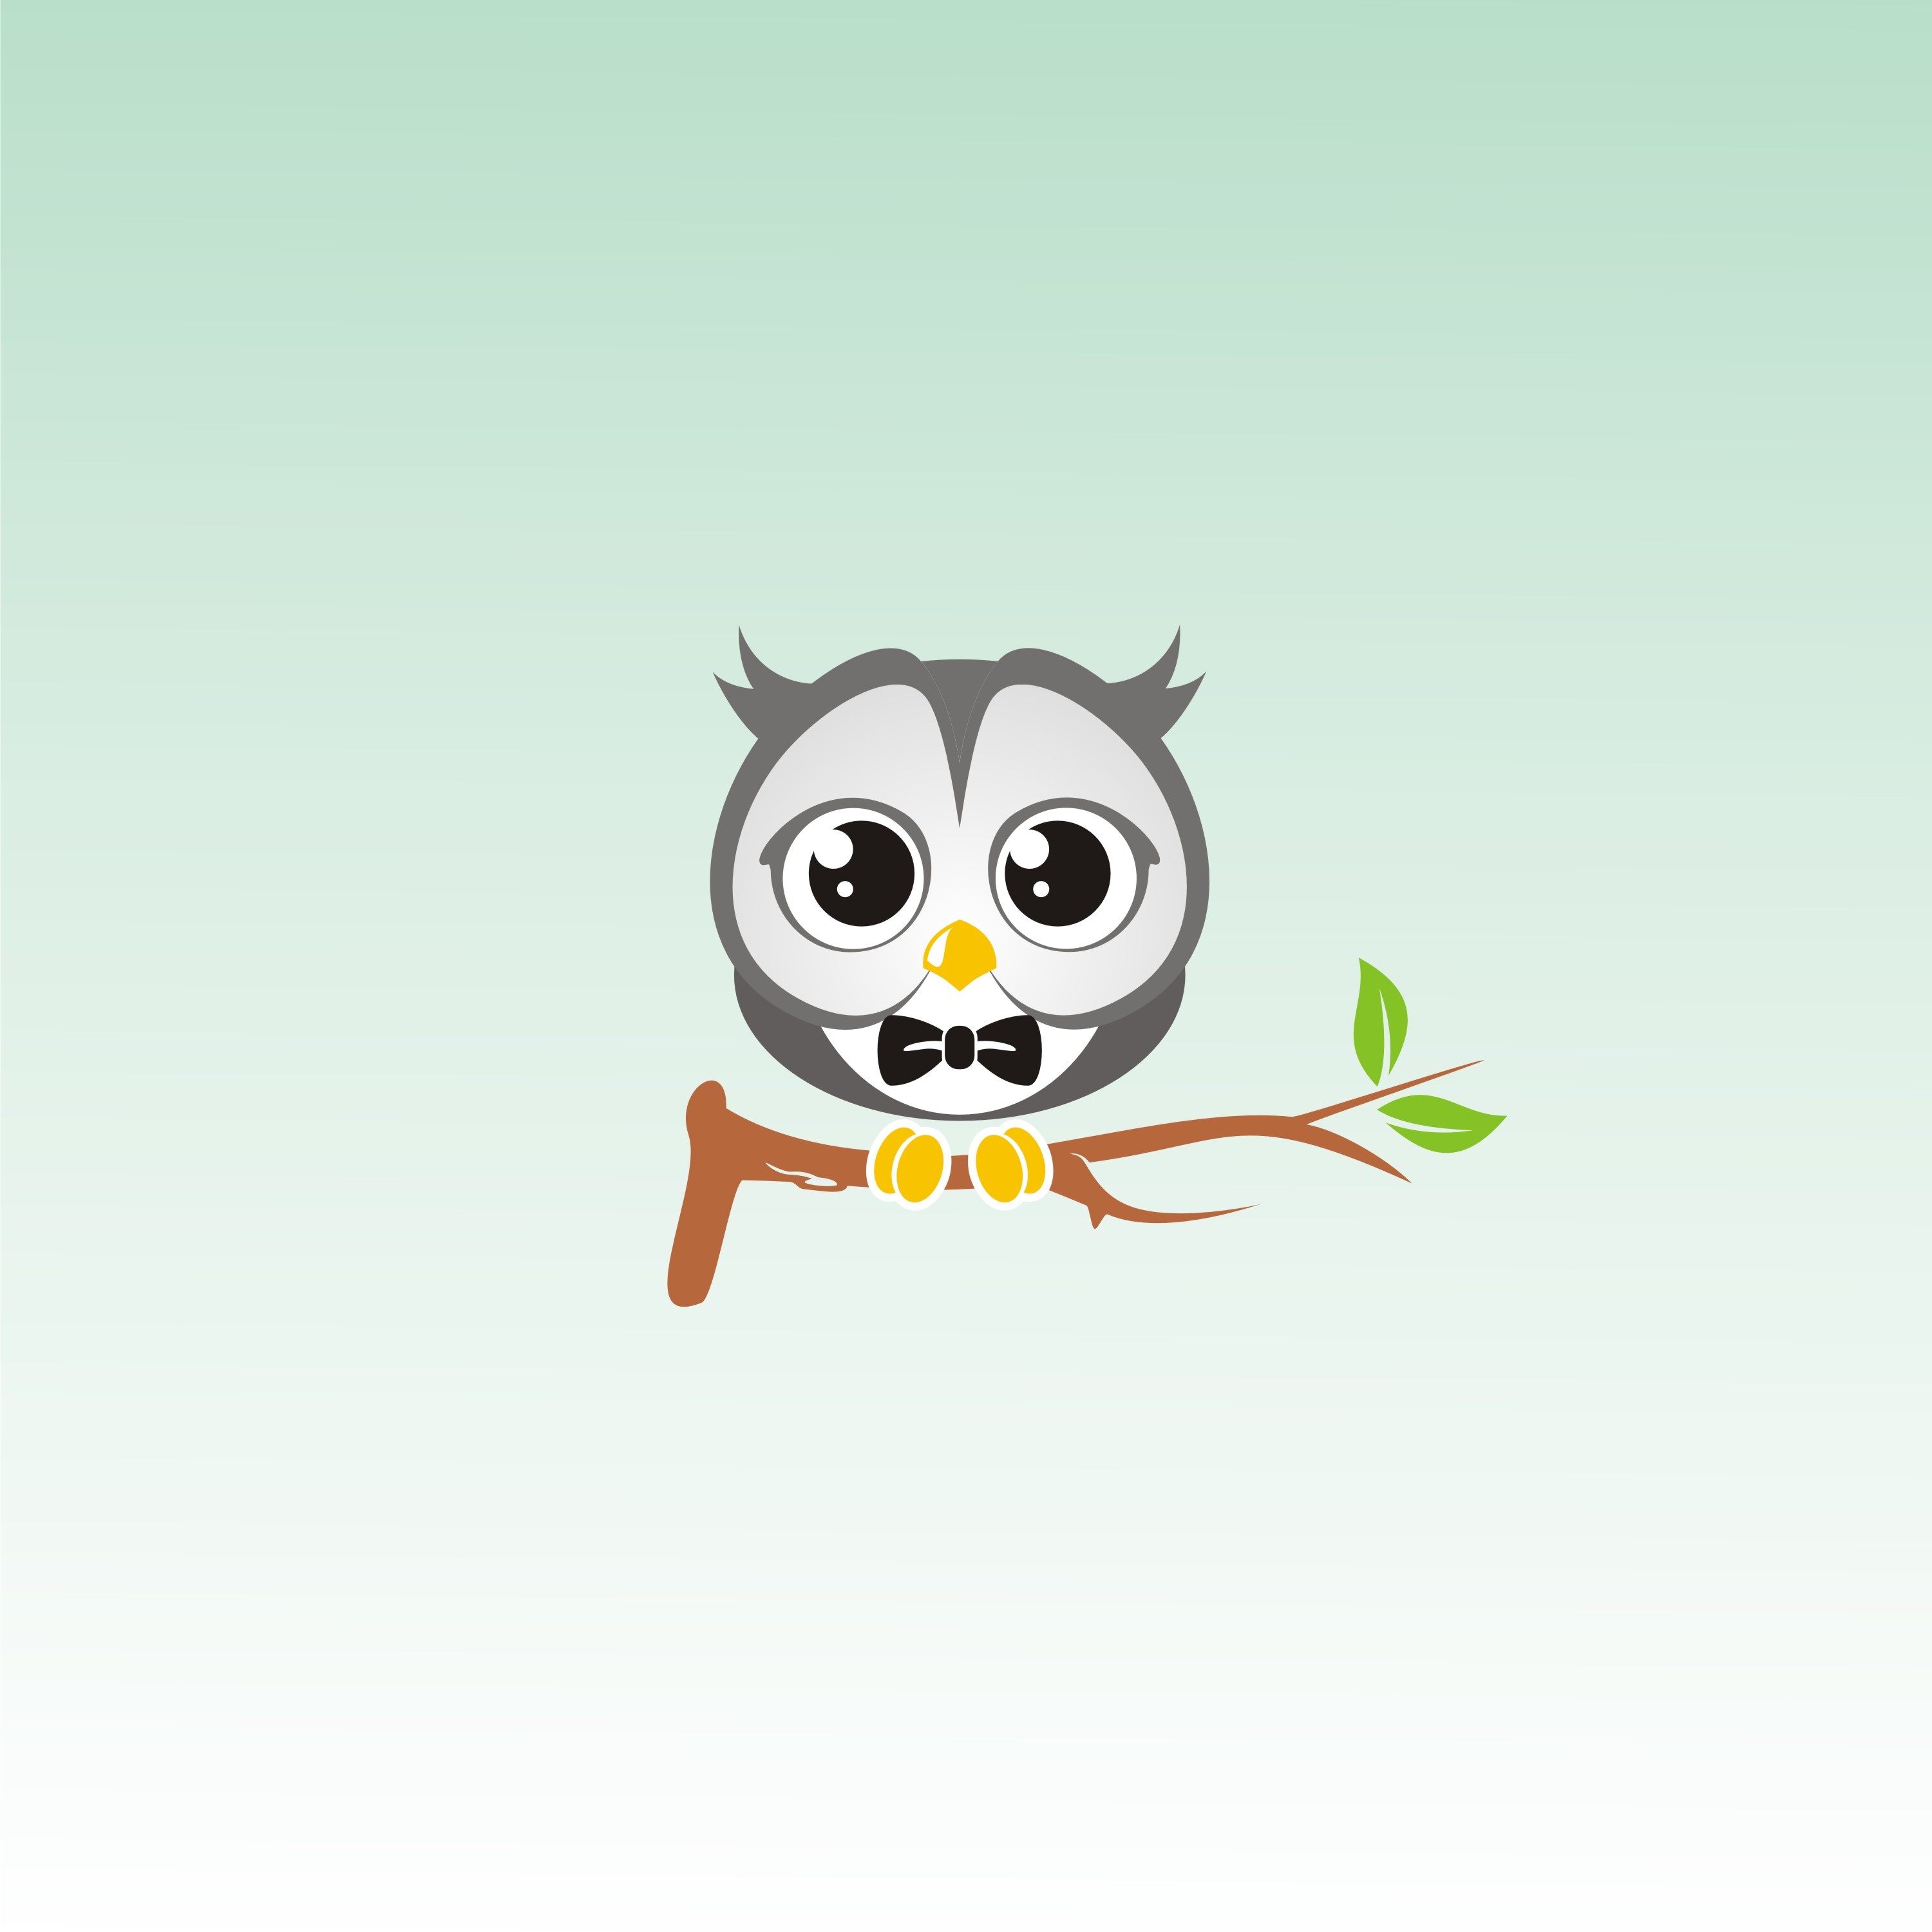 116611 download wallpaper owl, vector, art, branch, butterfly tie, bow tie screensavers and pictures for free